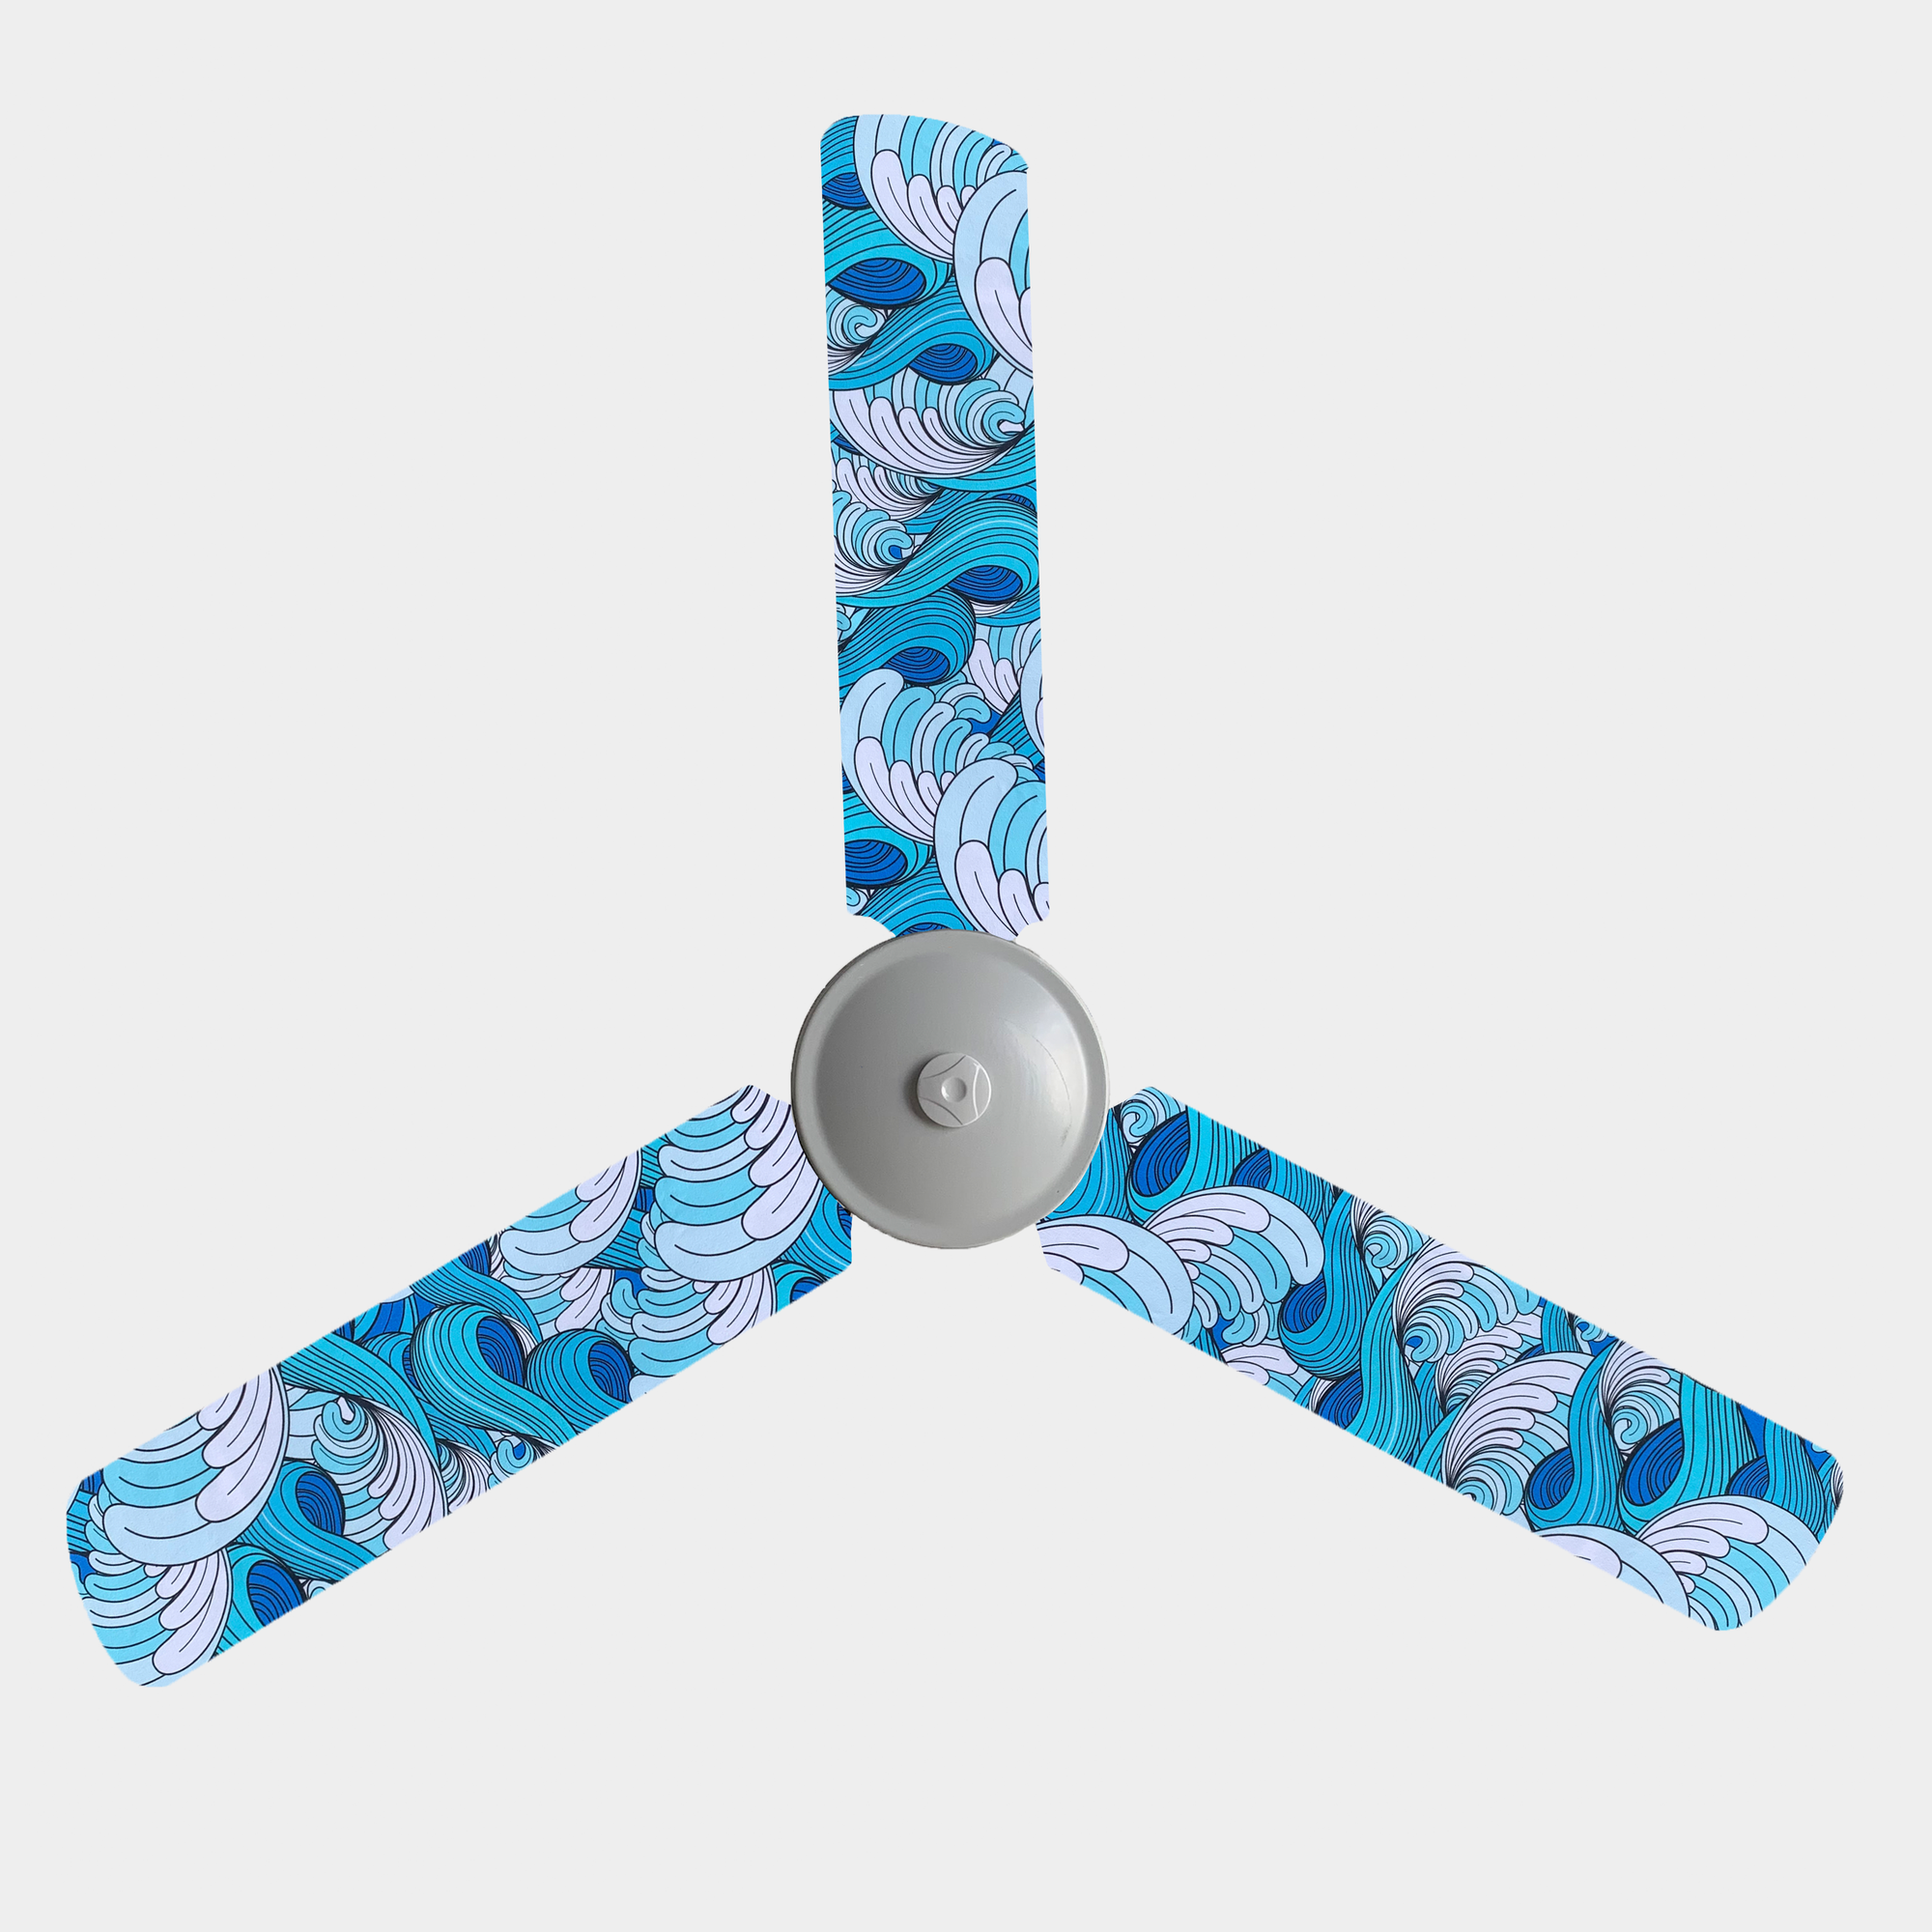 Ceiling fan blde cover with blue and white waves design